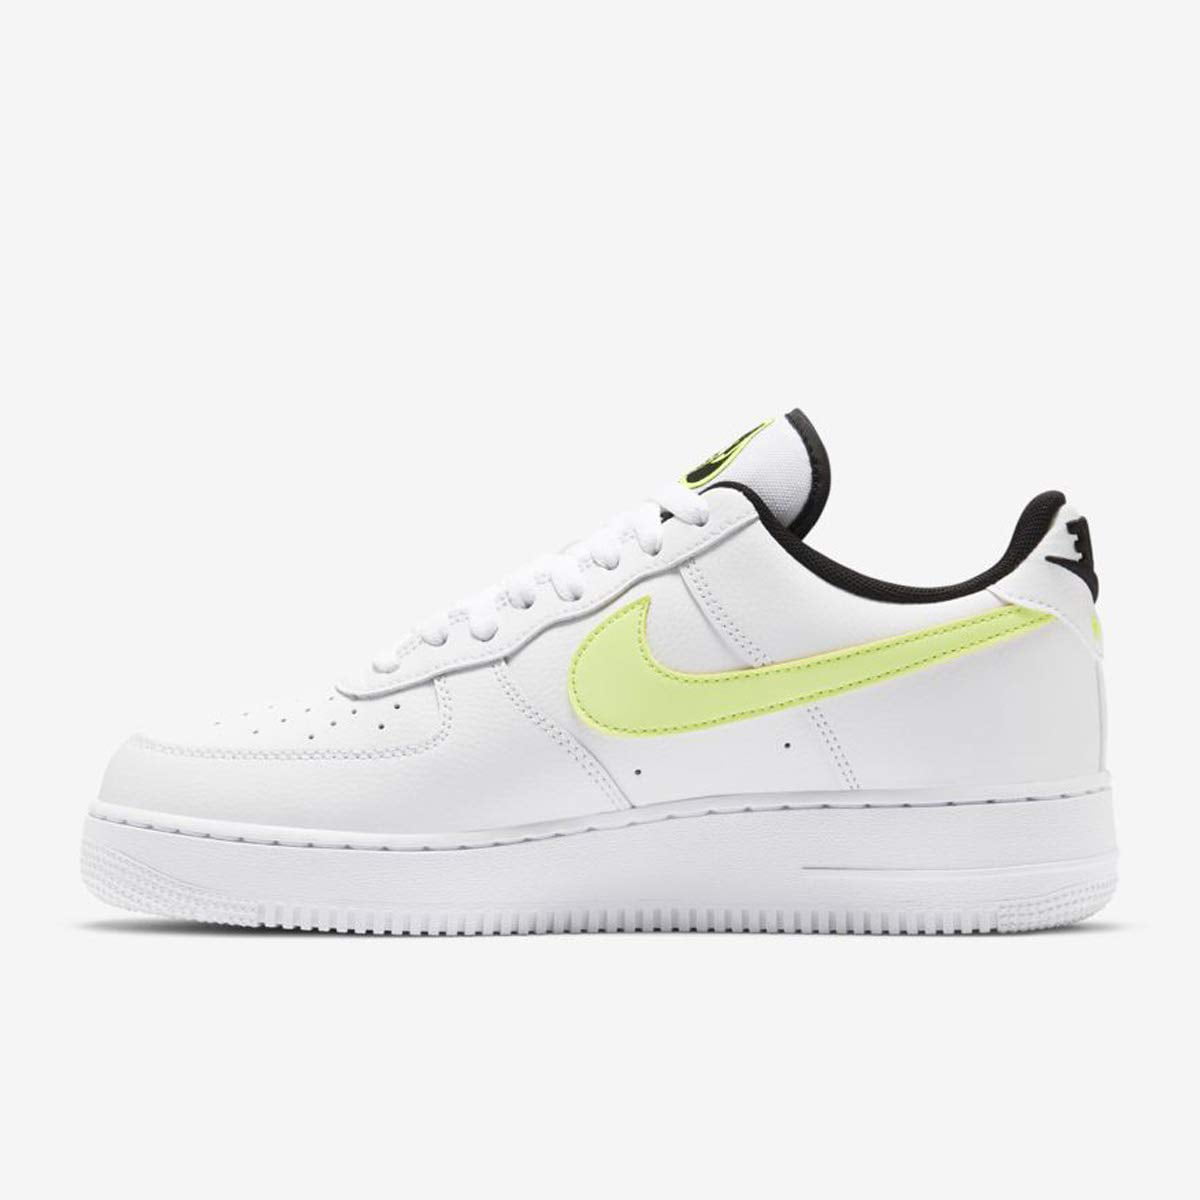 Nike Men's Air Force 1 '07 LV8 Worldwide Pack Basketball Shoes